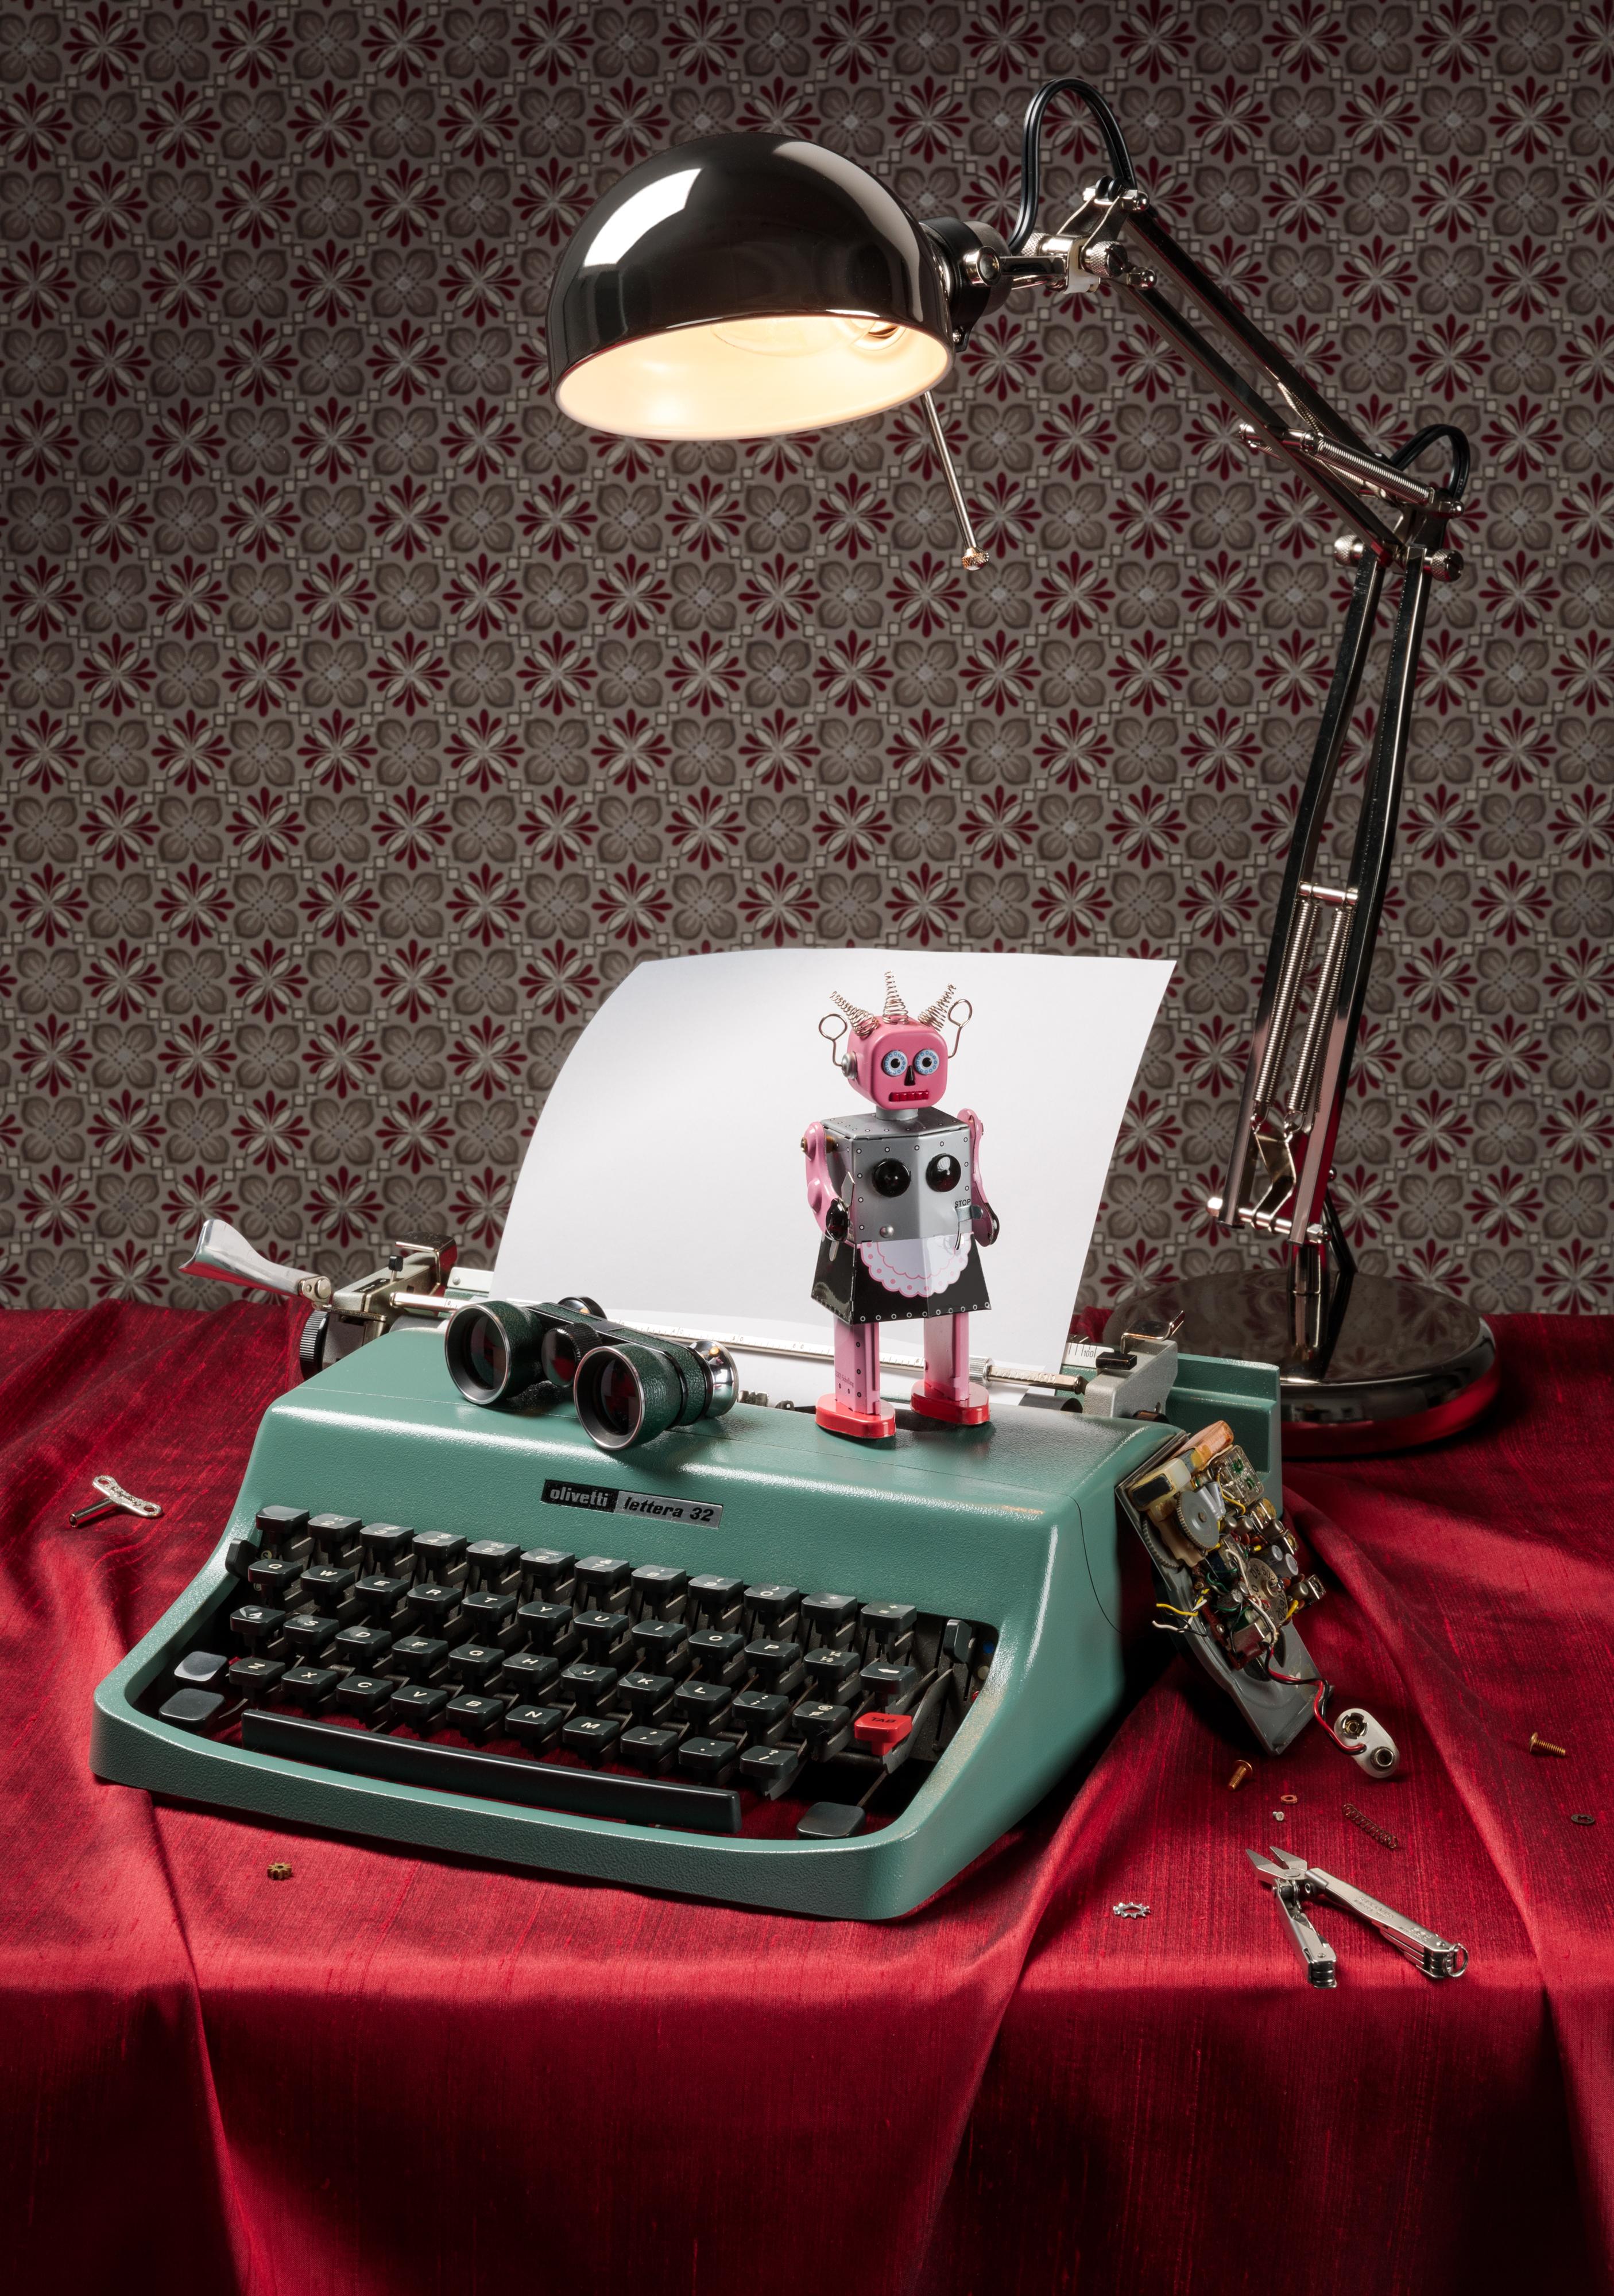 New Still-life Photograph with Vintage Typewriter, “Still Life with Robot” 